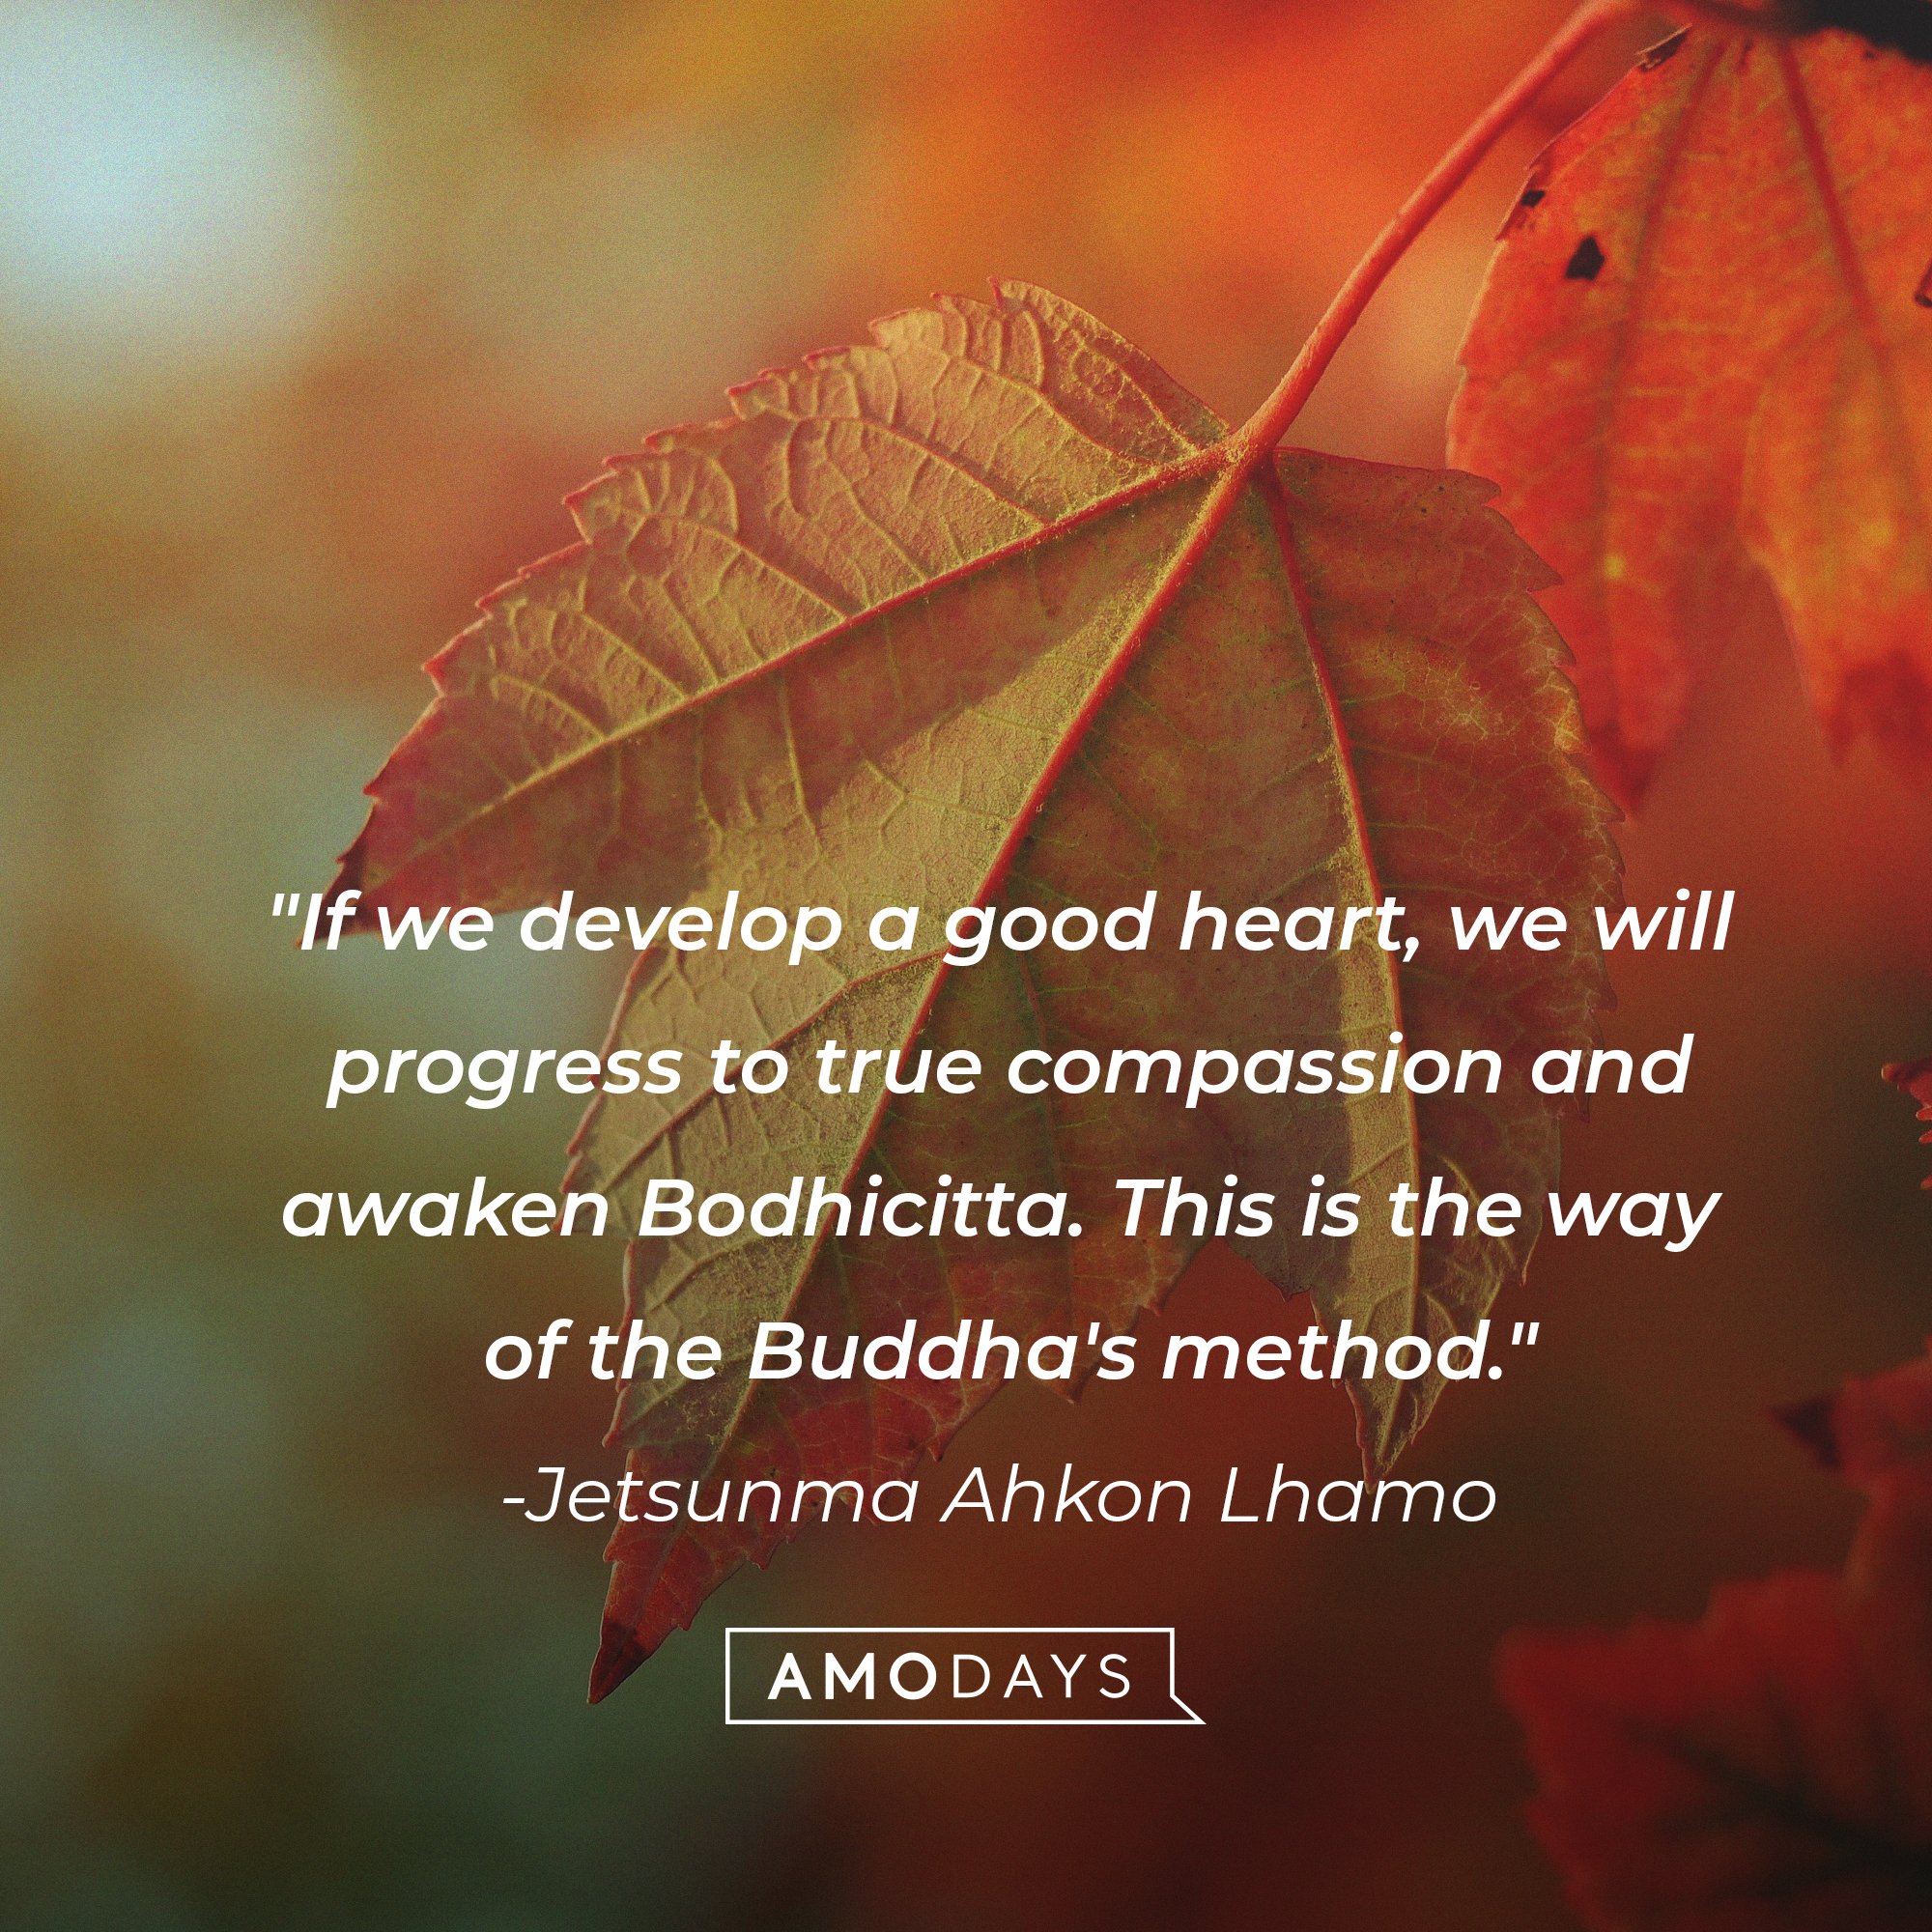 Jetsunma Ahkon Lhamo’s quote: "If we develop a good heart, we will progress to true compassion and awaken Bodhicitta. This is the way of the Buddha's method." | Image: AmoDays